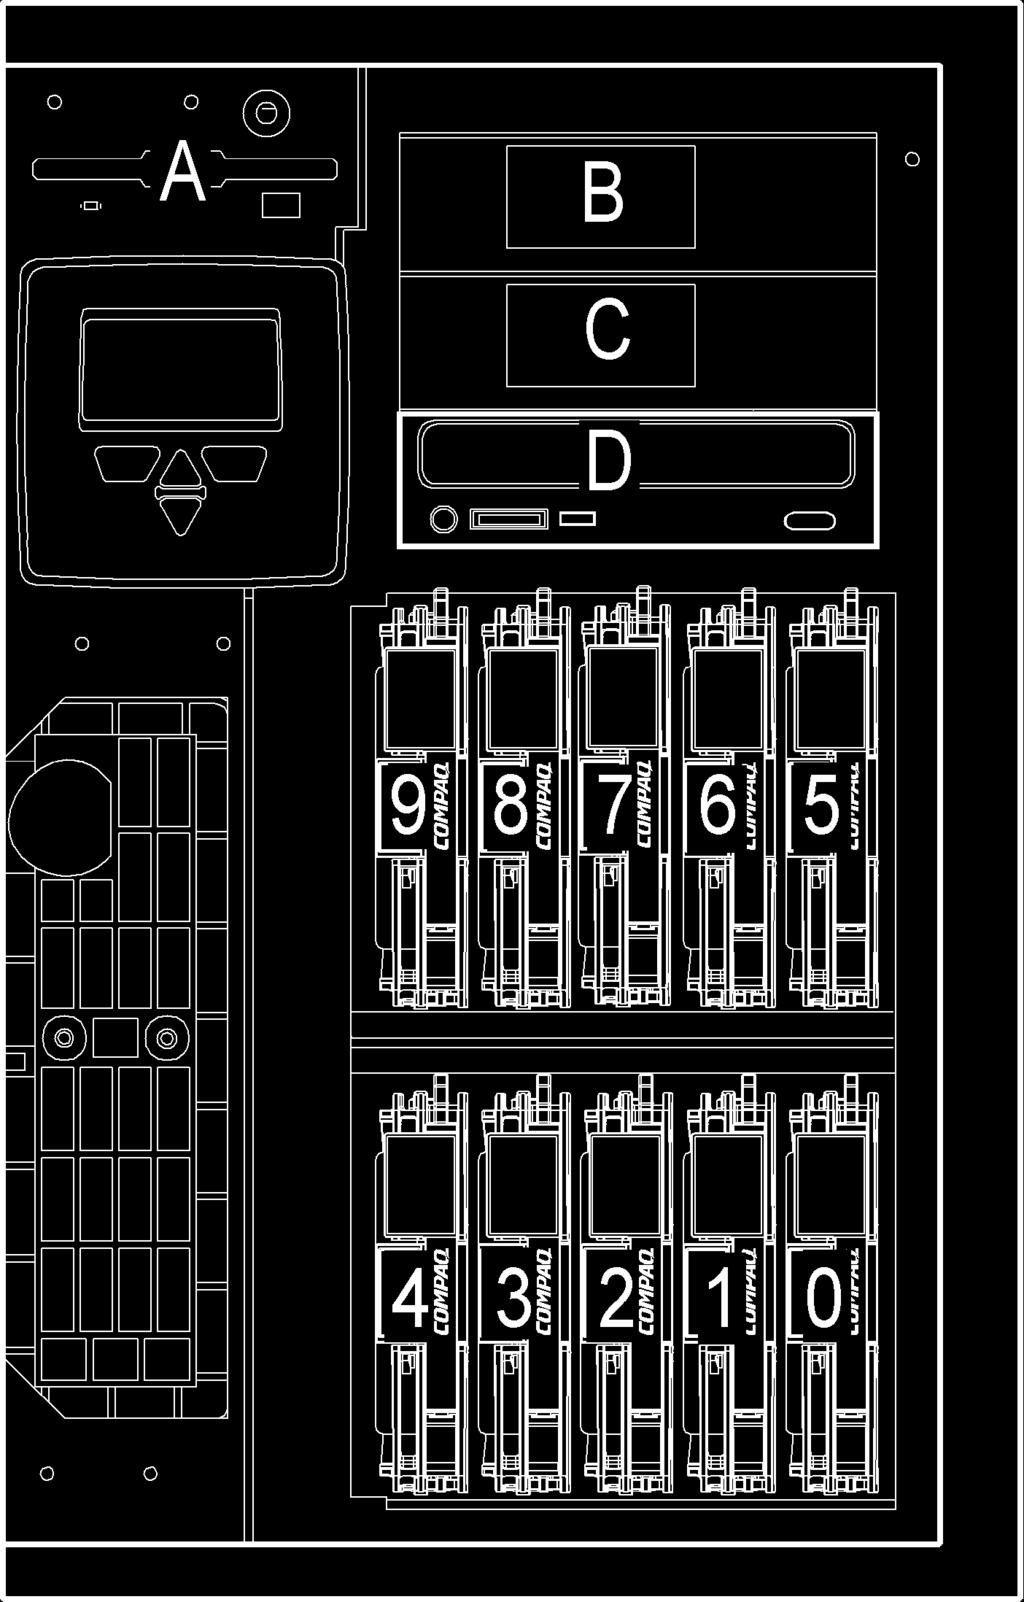 Channel Wide Ultra2 SCSI Wide Ultra2 Hot Pluggable Drives (supported on the 600 MHz (154258-xx2), 550 MHz (126747-xx2) and 500 MHz (382200-xx2) Array models and the optional Ultra2/Ultra3 drive cages